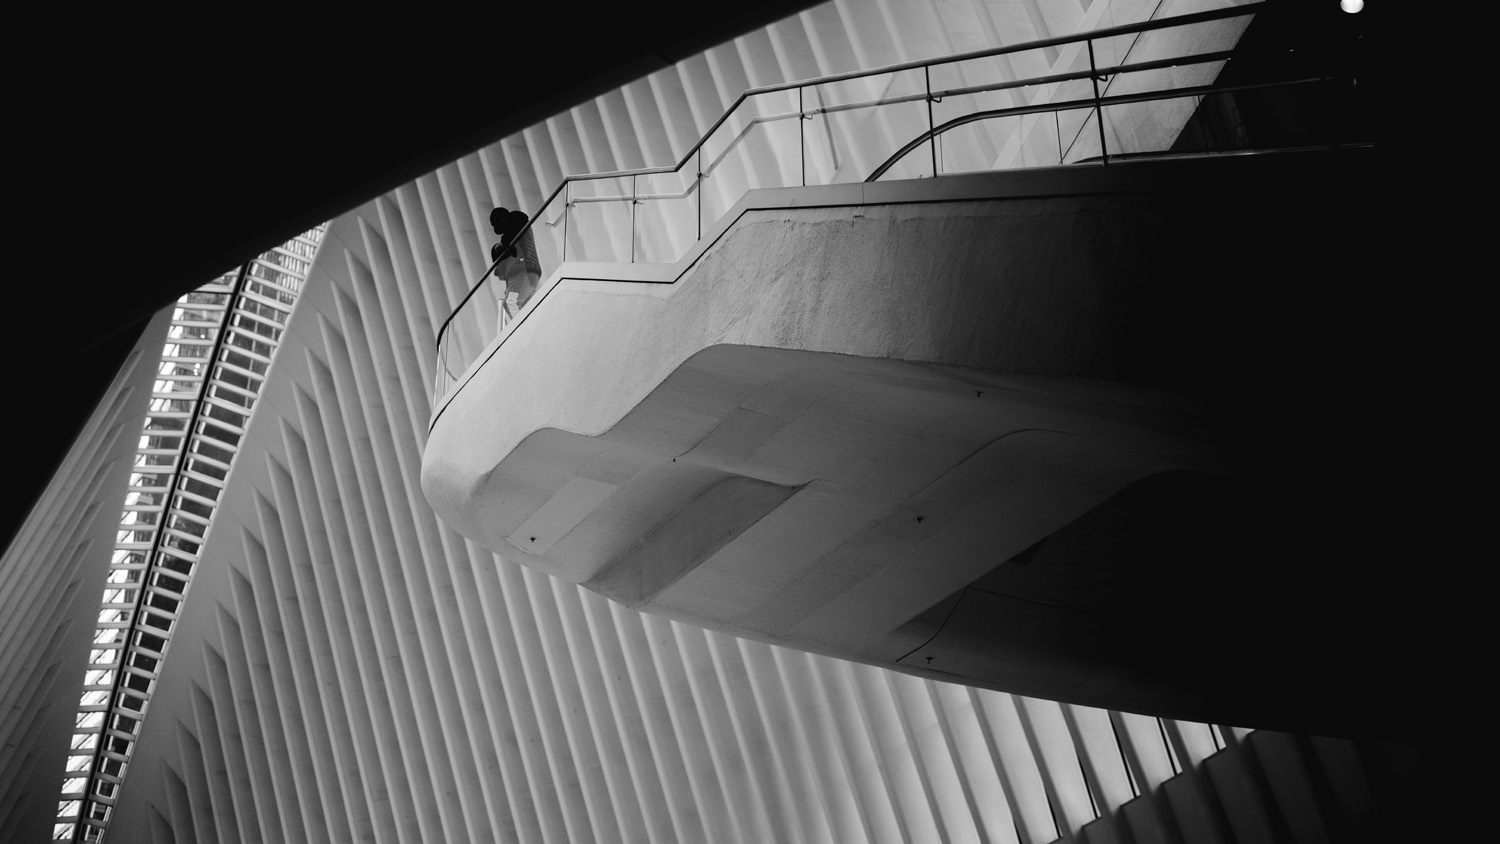 Abstract black and white image of a person standing on balcony